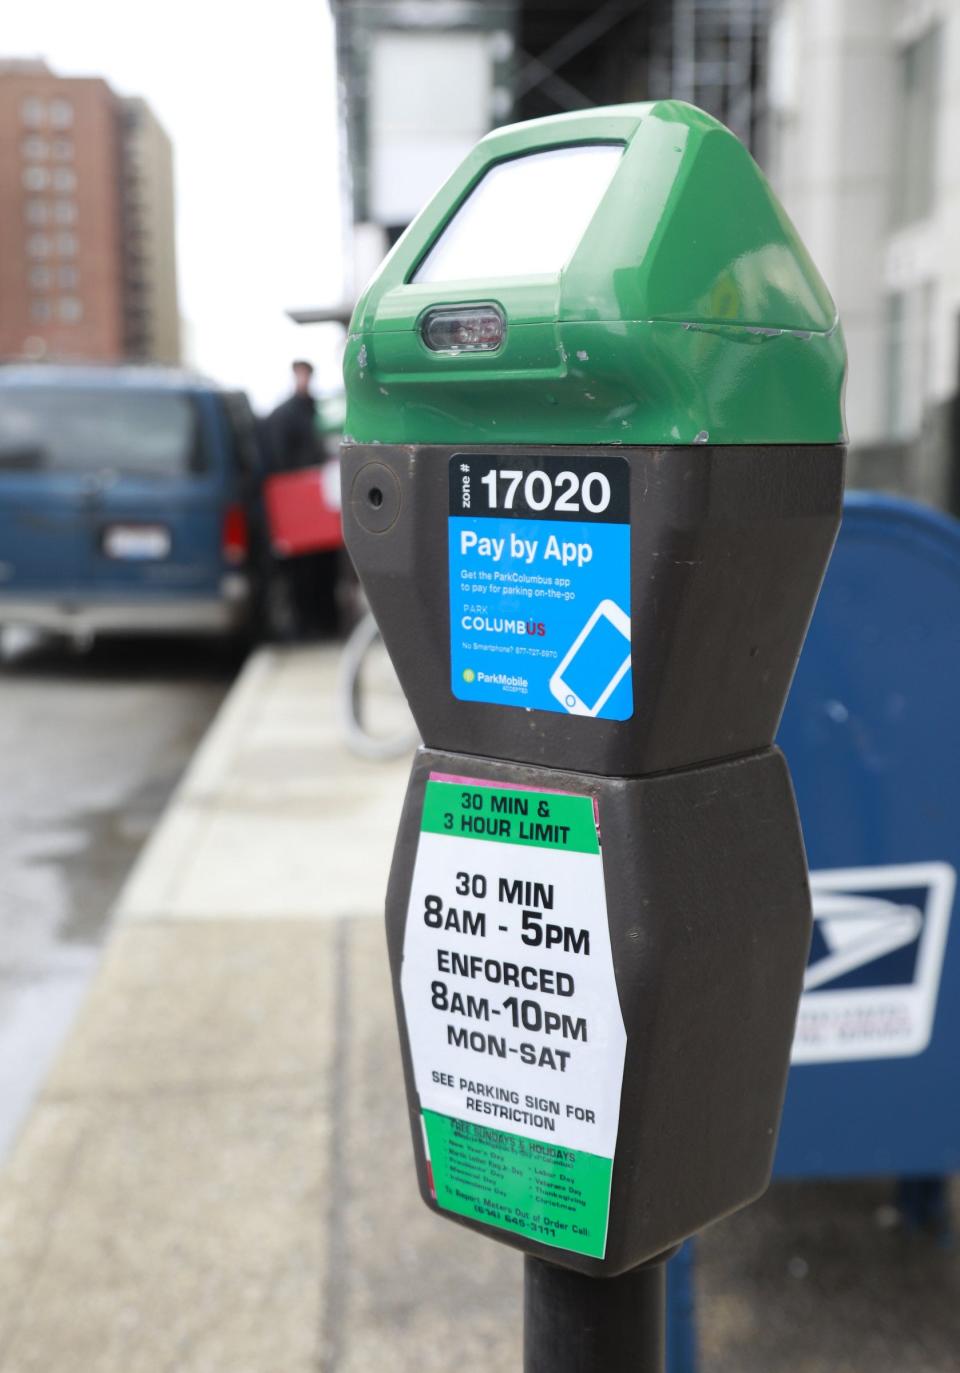 The remainder of parking meters in Columbus are expected to be replaced with kiosks soon. As shown on the sticker on this meter, drivers can pay for parking with an app. [Barbara J. Perenic/Dispatch]